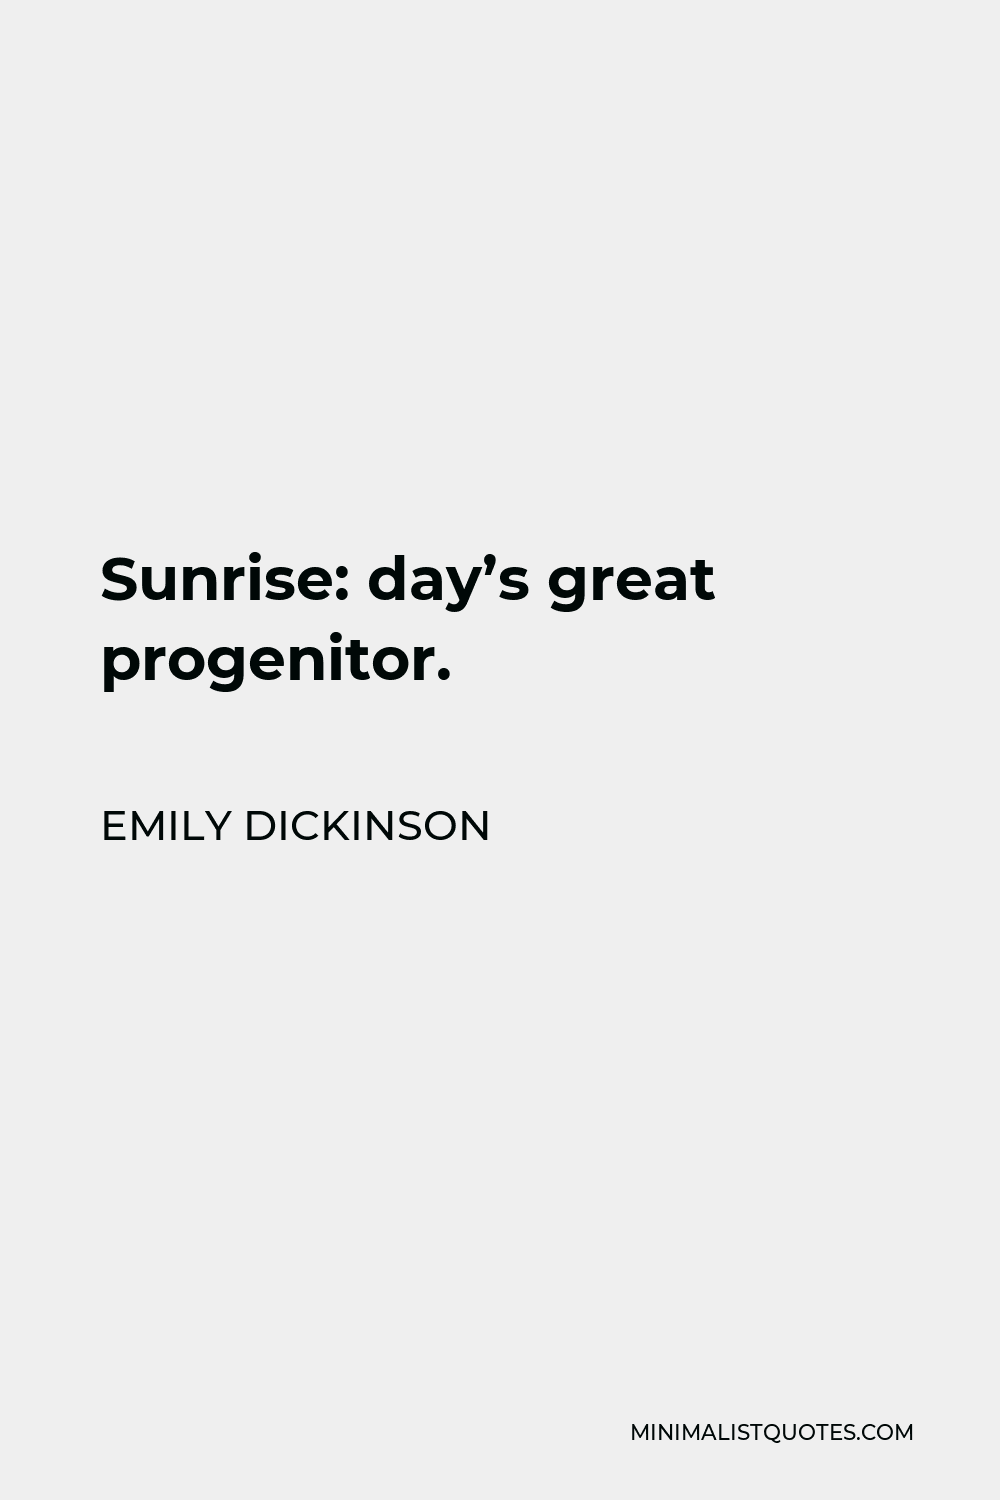 Emily Dickinson Quote - Sunrise: day’s great progenitor.